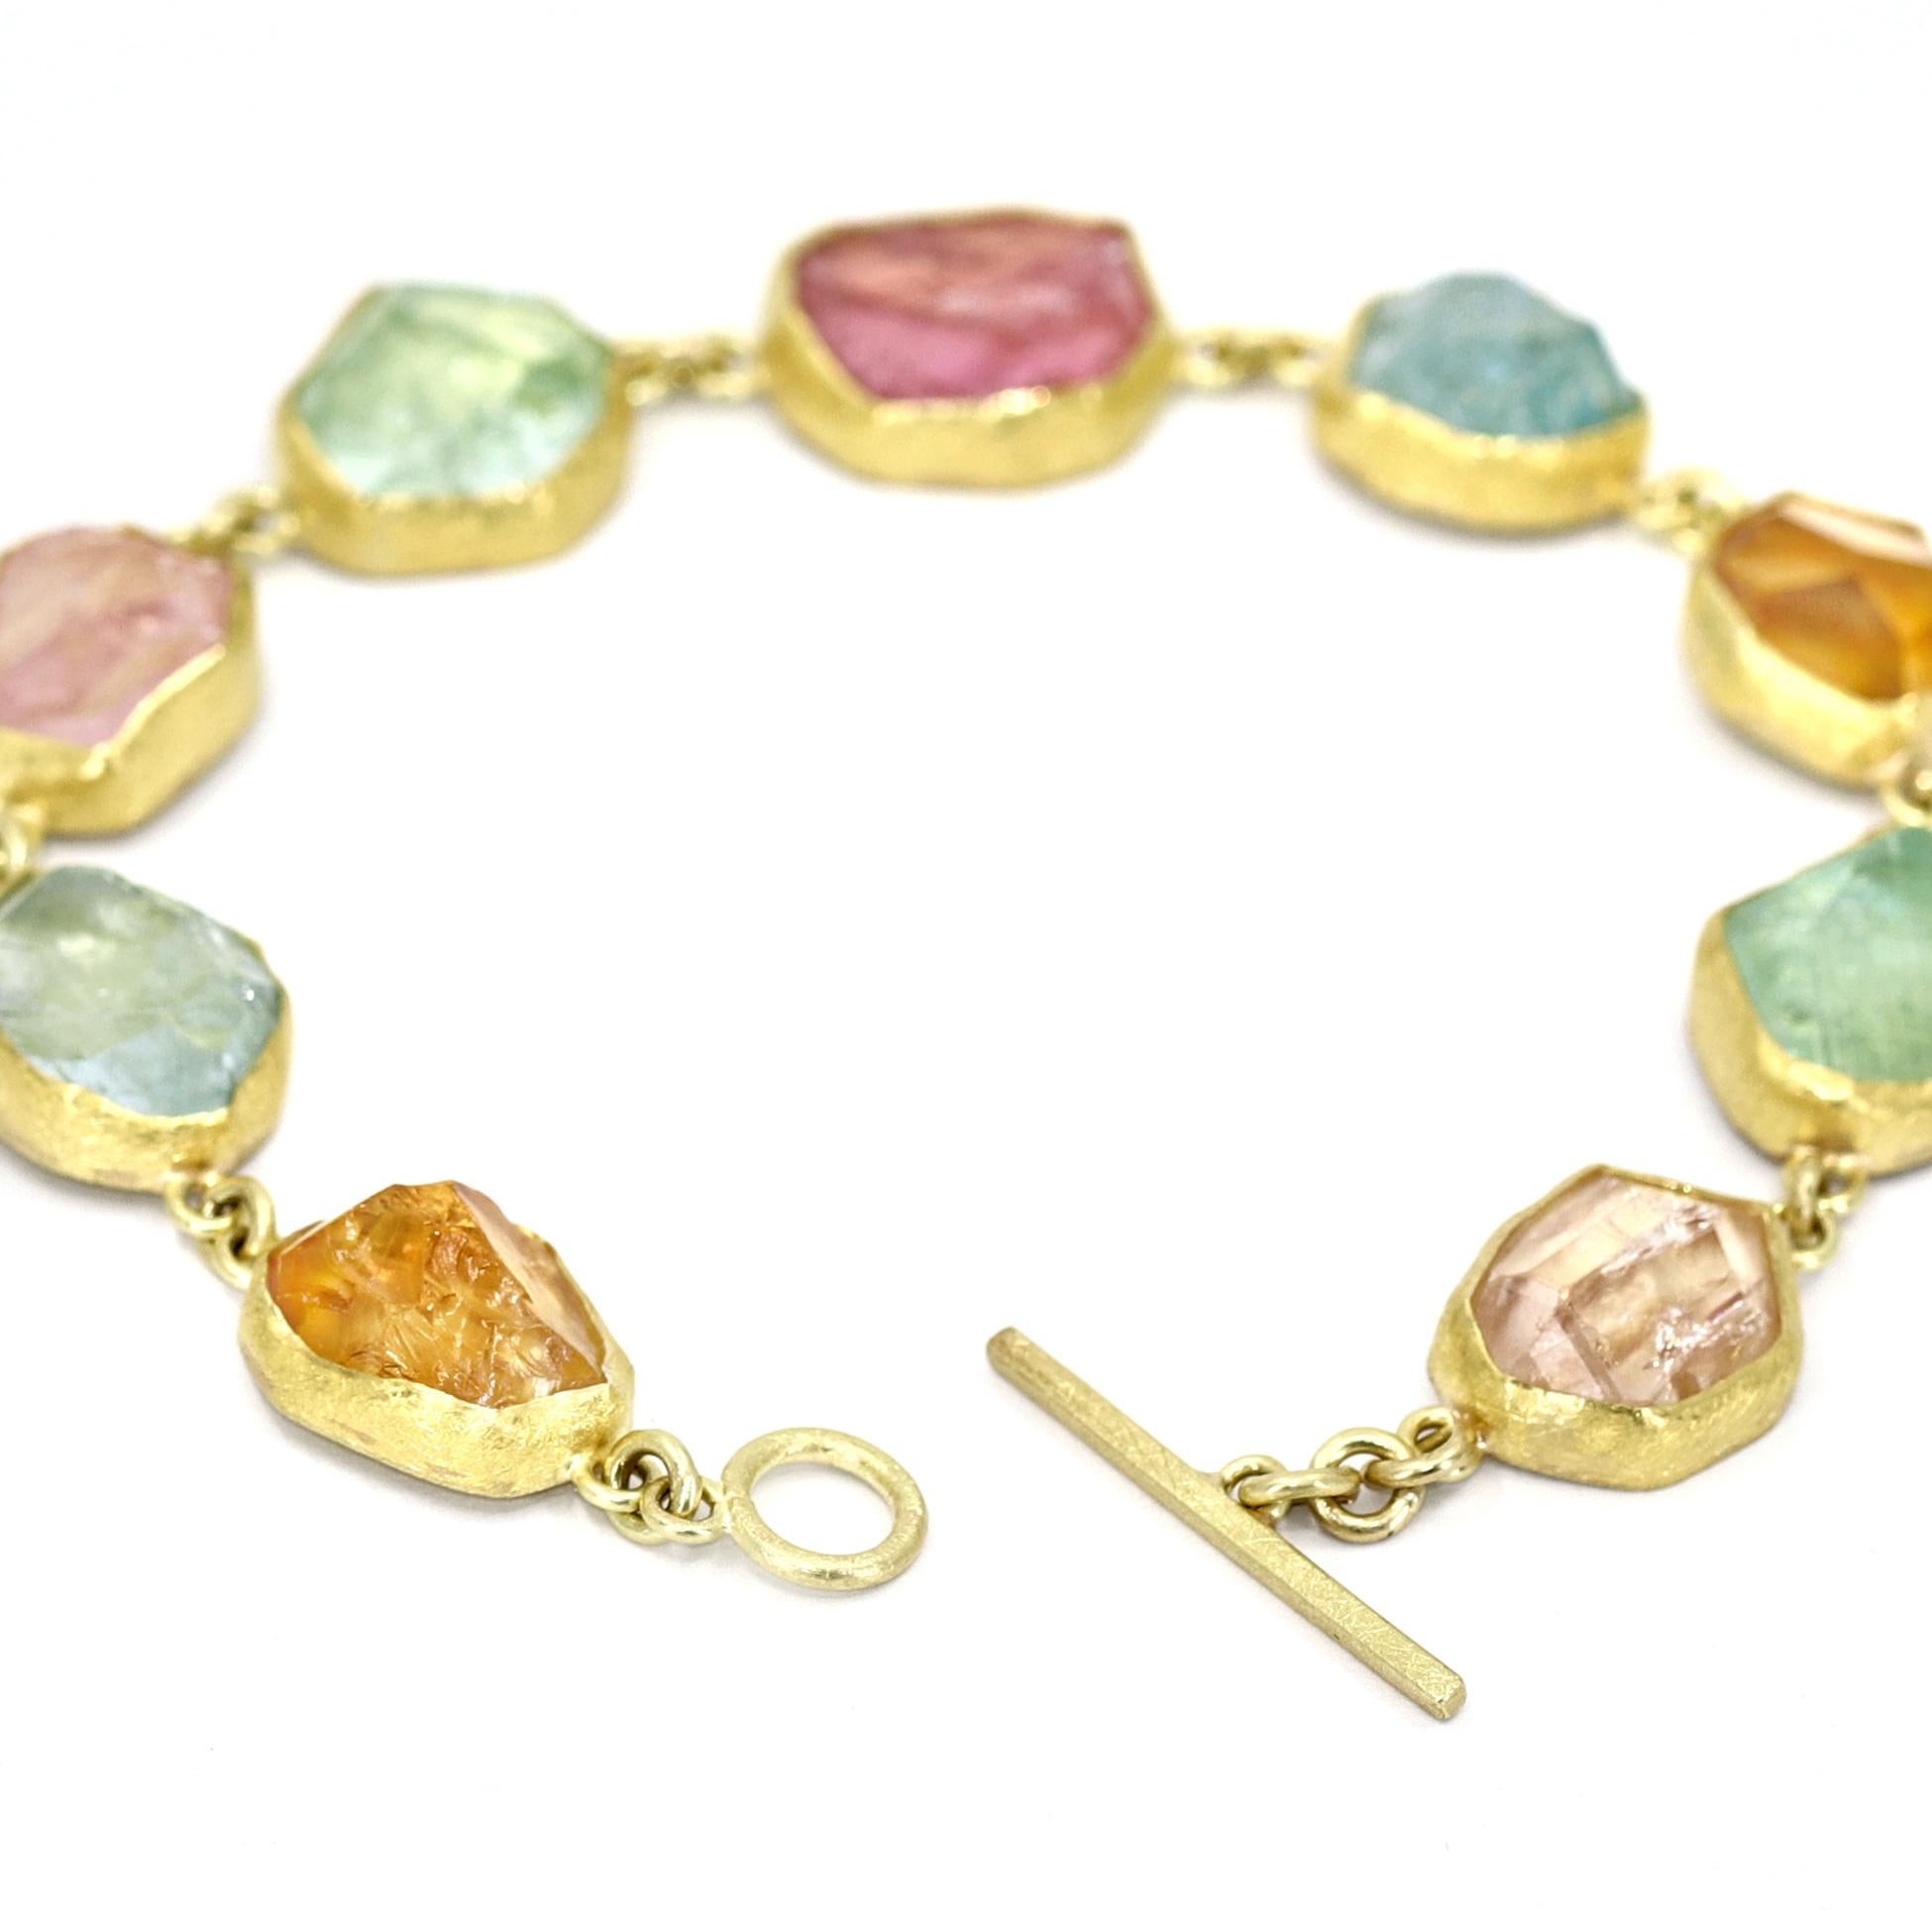 A one of a kind, wearable work of art by acclaimed jewelry maker Petra Class, the 'In the Rough' Bracelet is handmade in signature-finished 22k yellow gold and showcases an assortment of aquamarine, citrine, Imperial topaz, green tourmaline, and